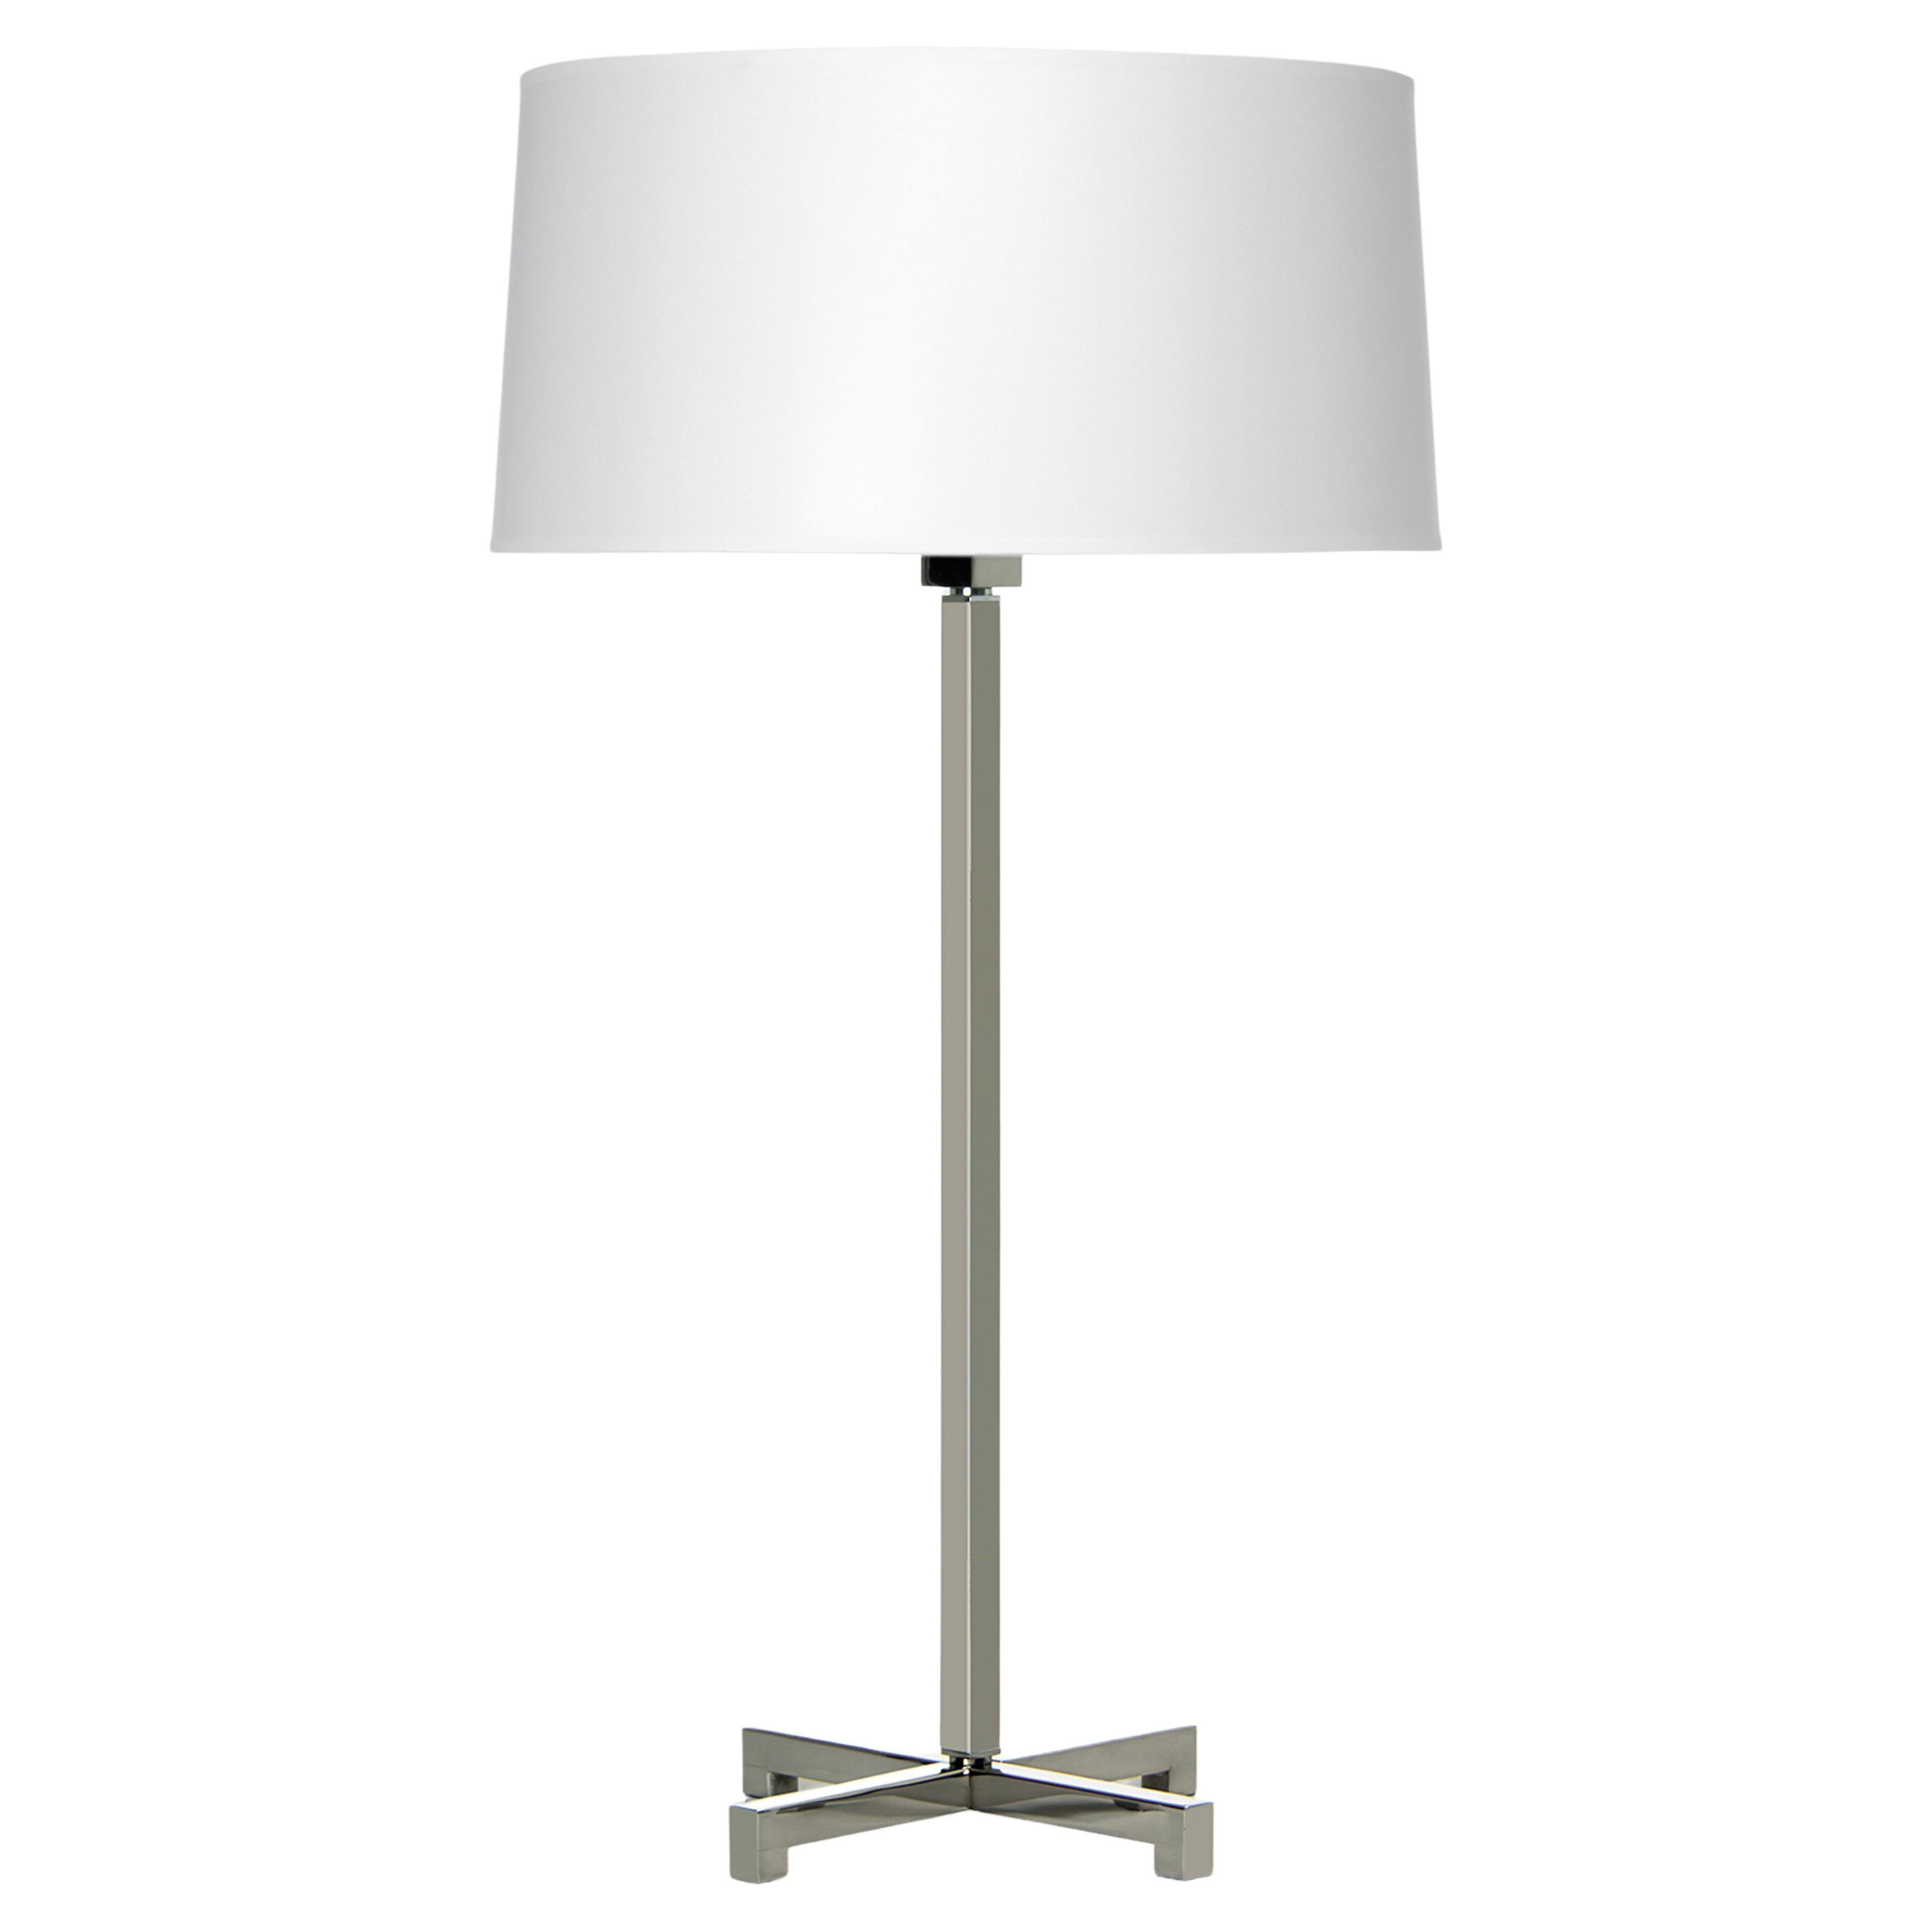 Nessen Lighting NT402 Table Lamp in Polished Chrome